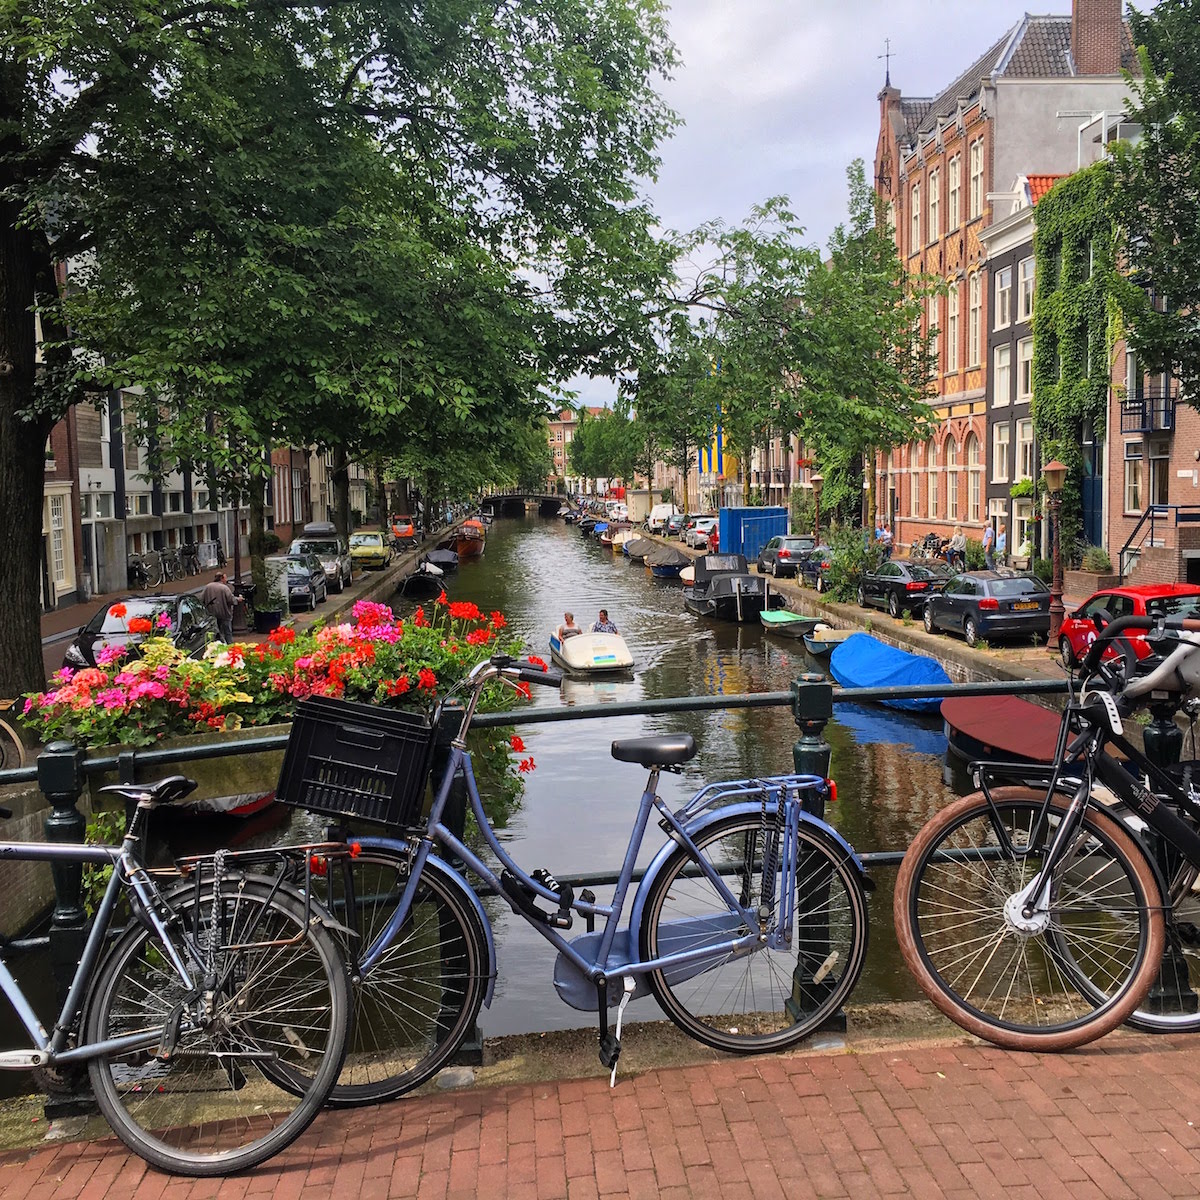 Bucket list ideas: Walk the canals of Amsterdam in the Netherlands.